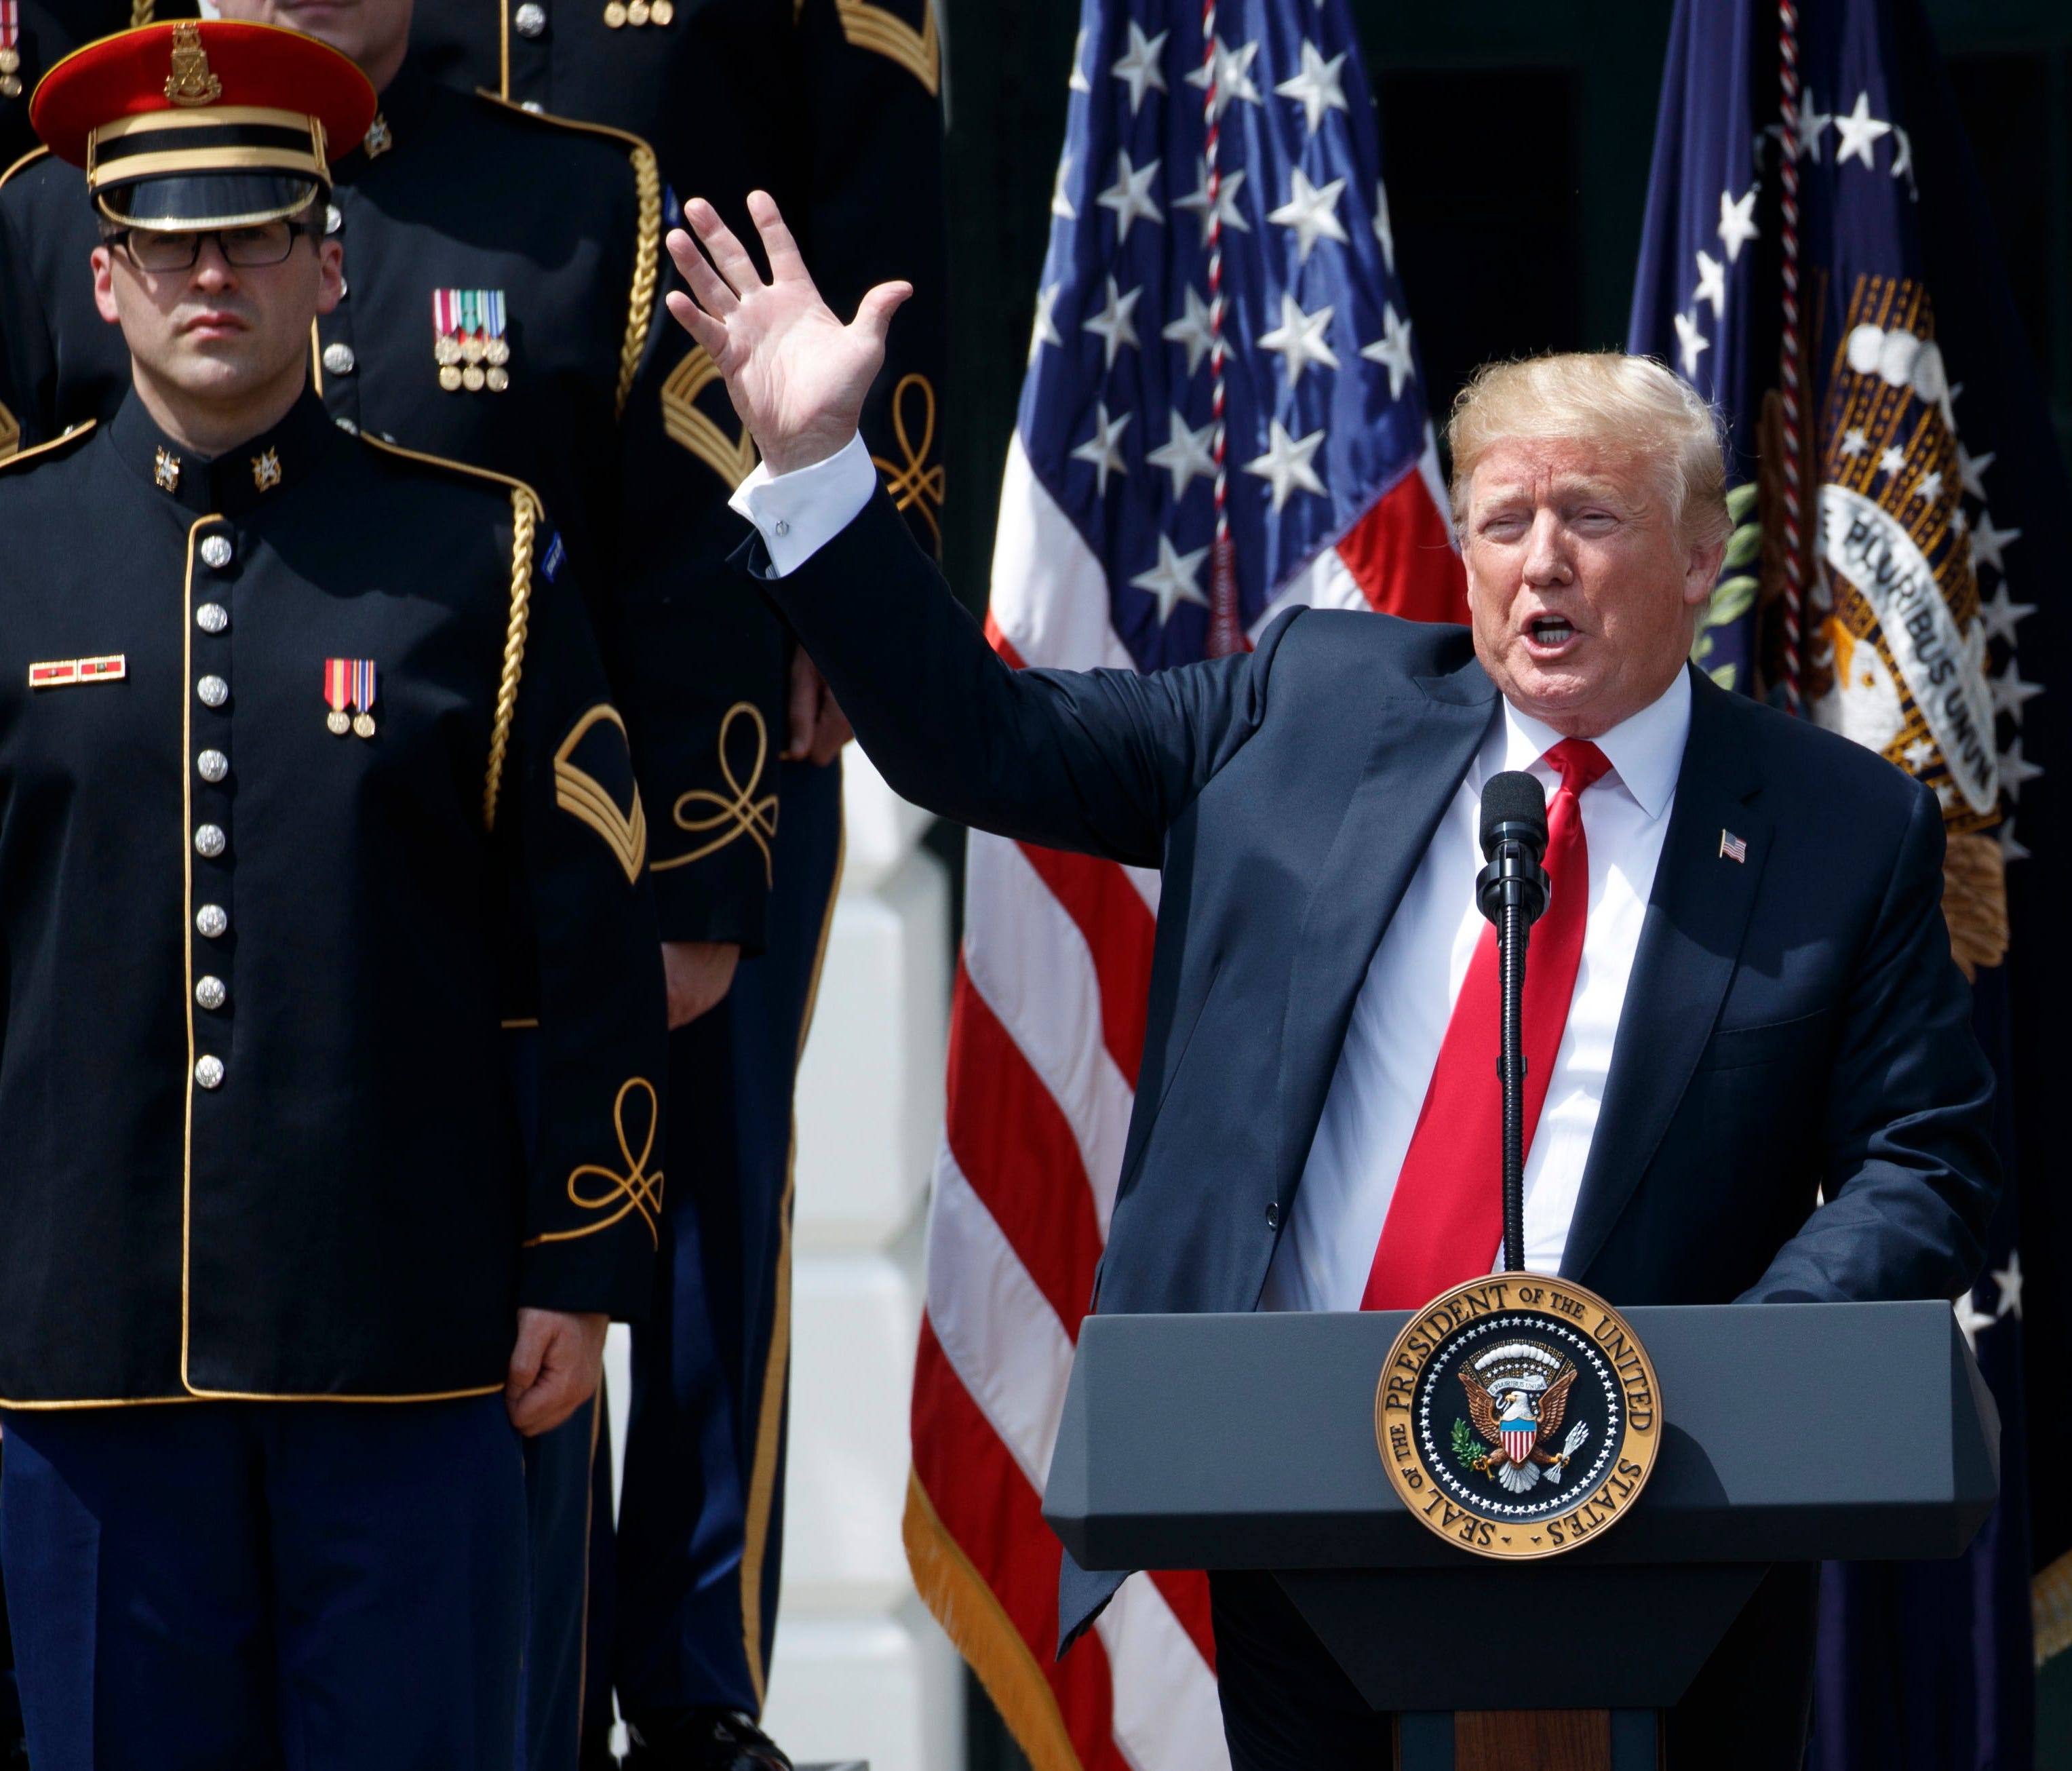 President Trump sings 'God Bless America' during his Celebrate America event on the South Lawn of the White House in Washington, June 5, 2018.